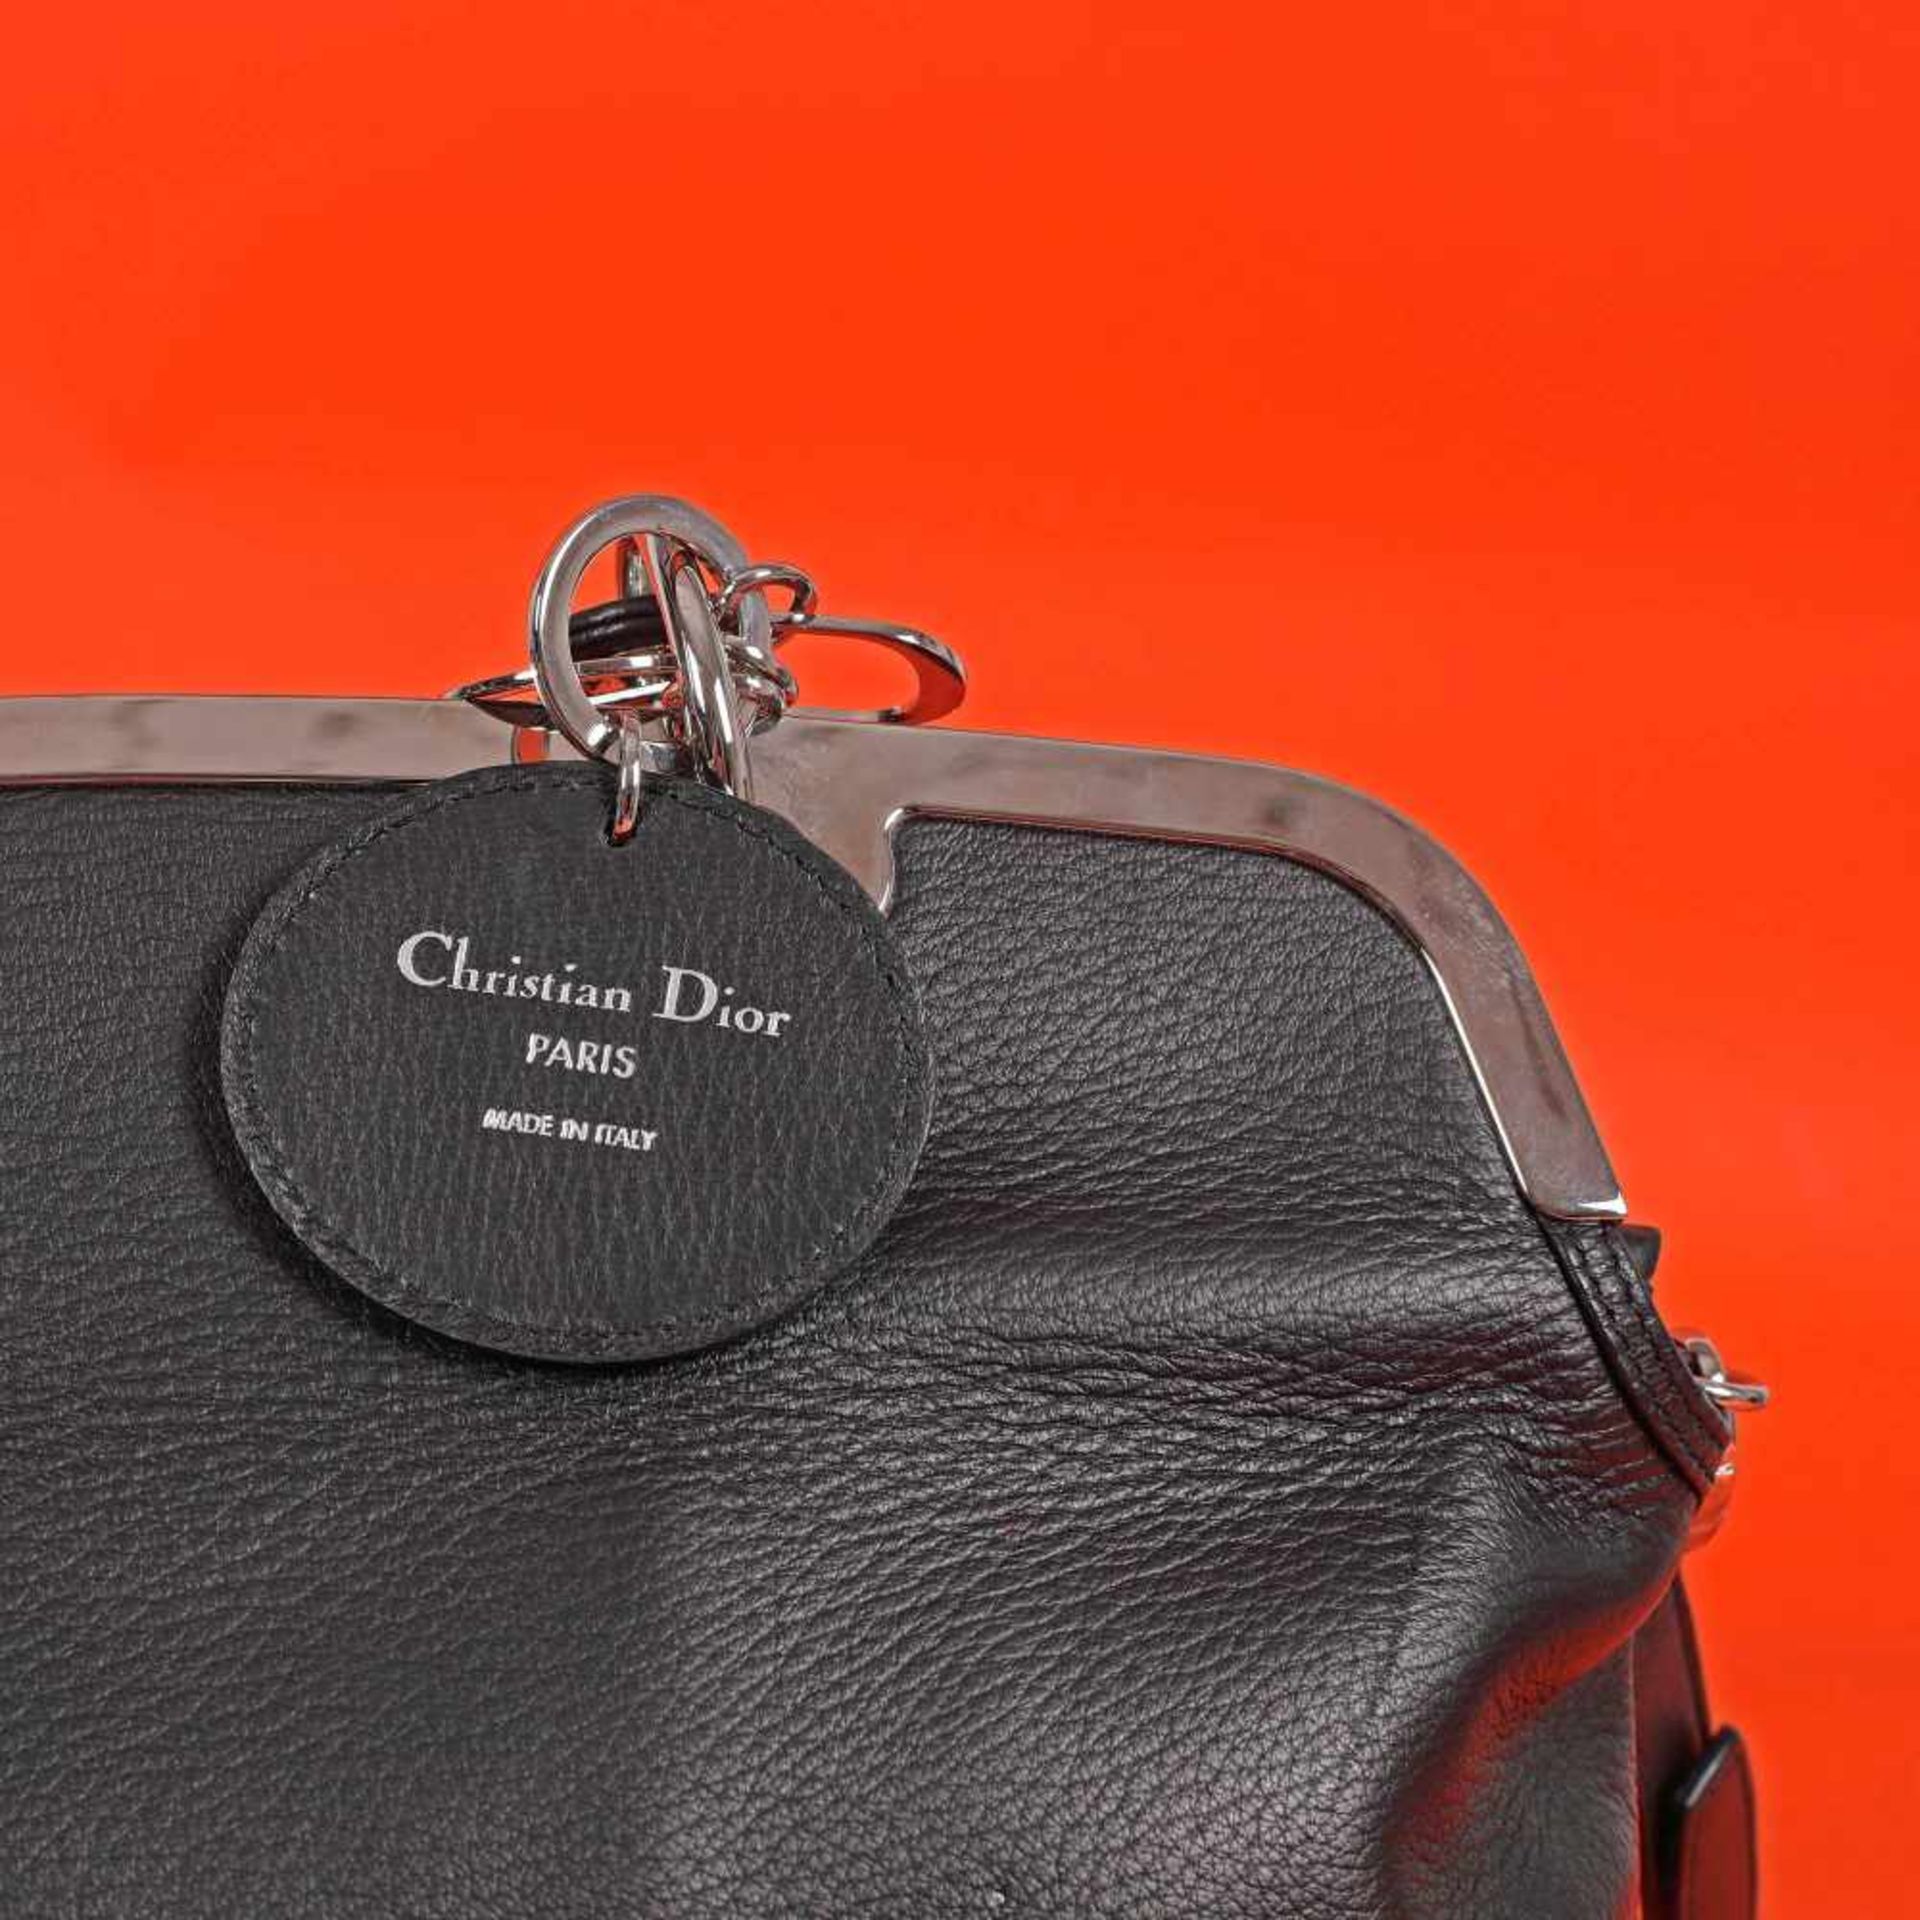 "Granville" - Dior bag, leather, for women - Image 3 of 8